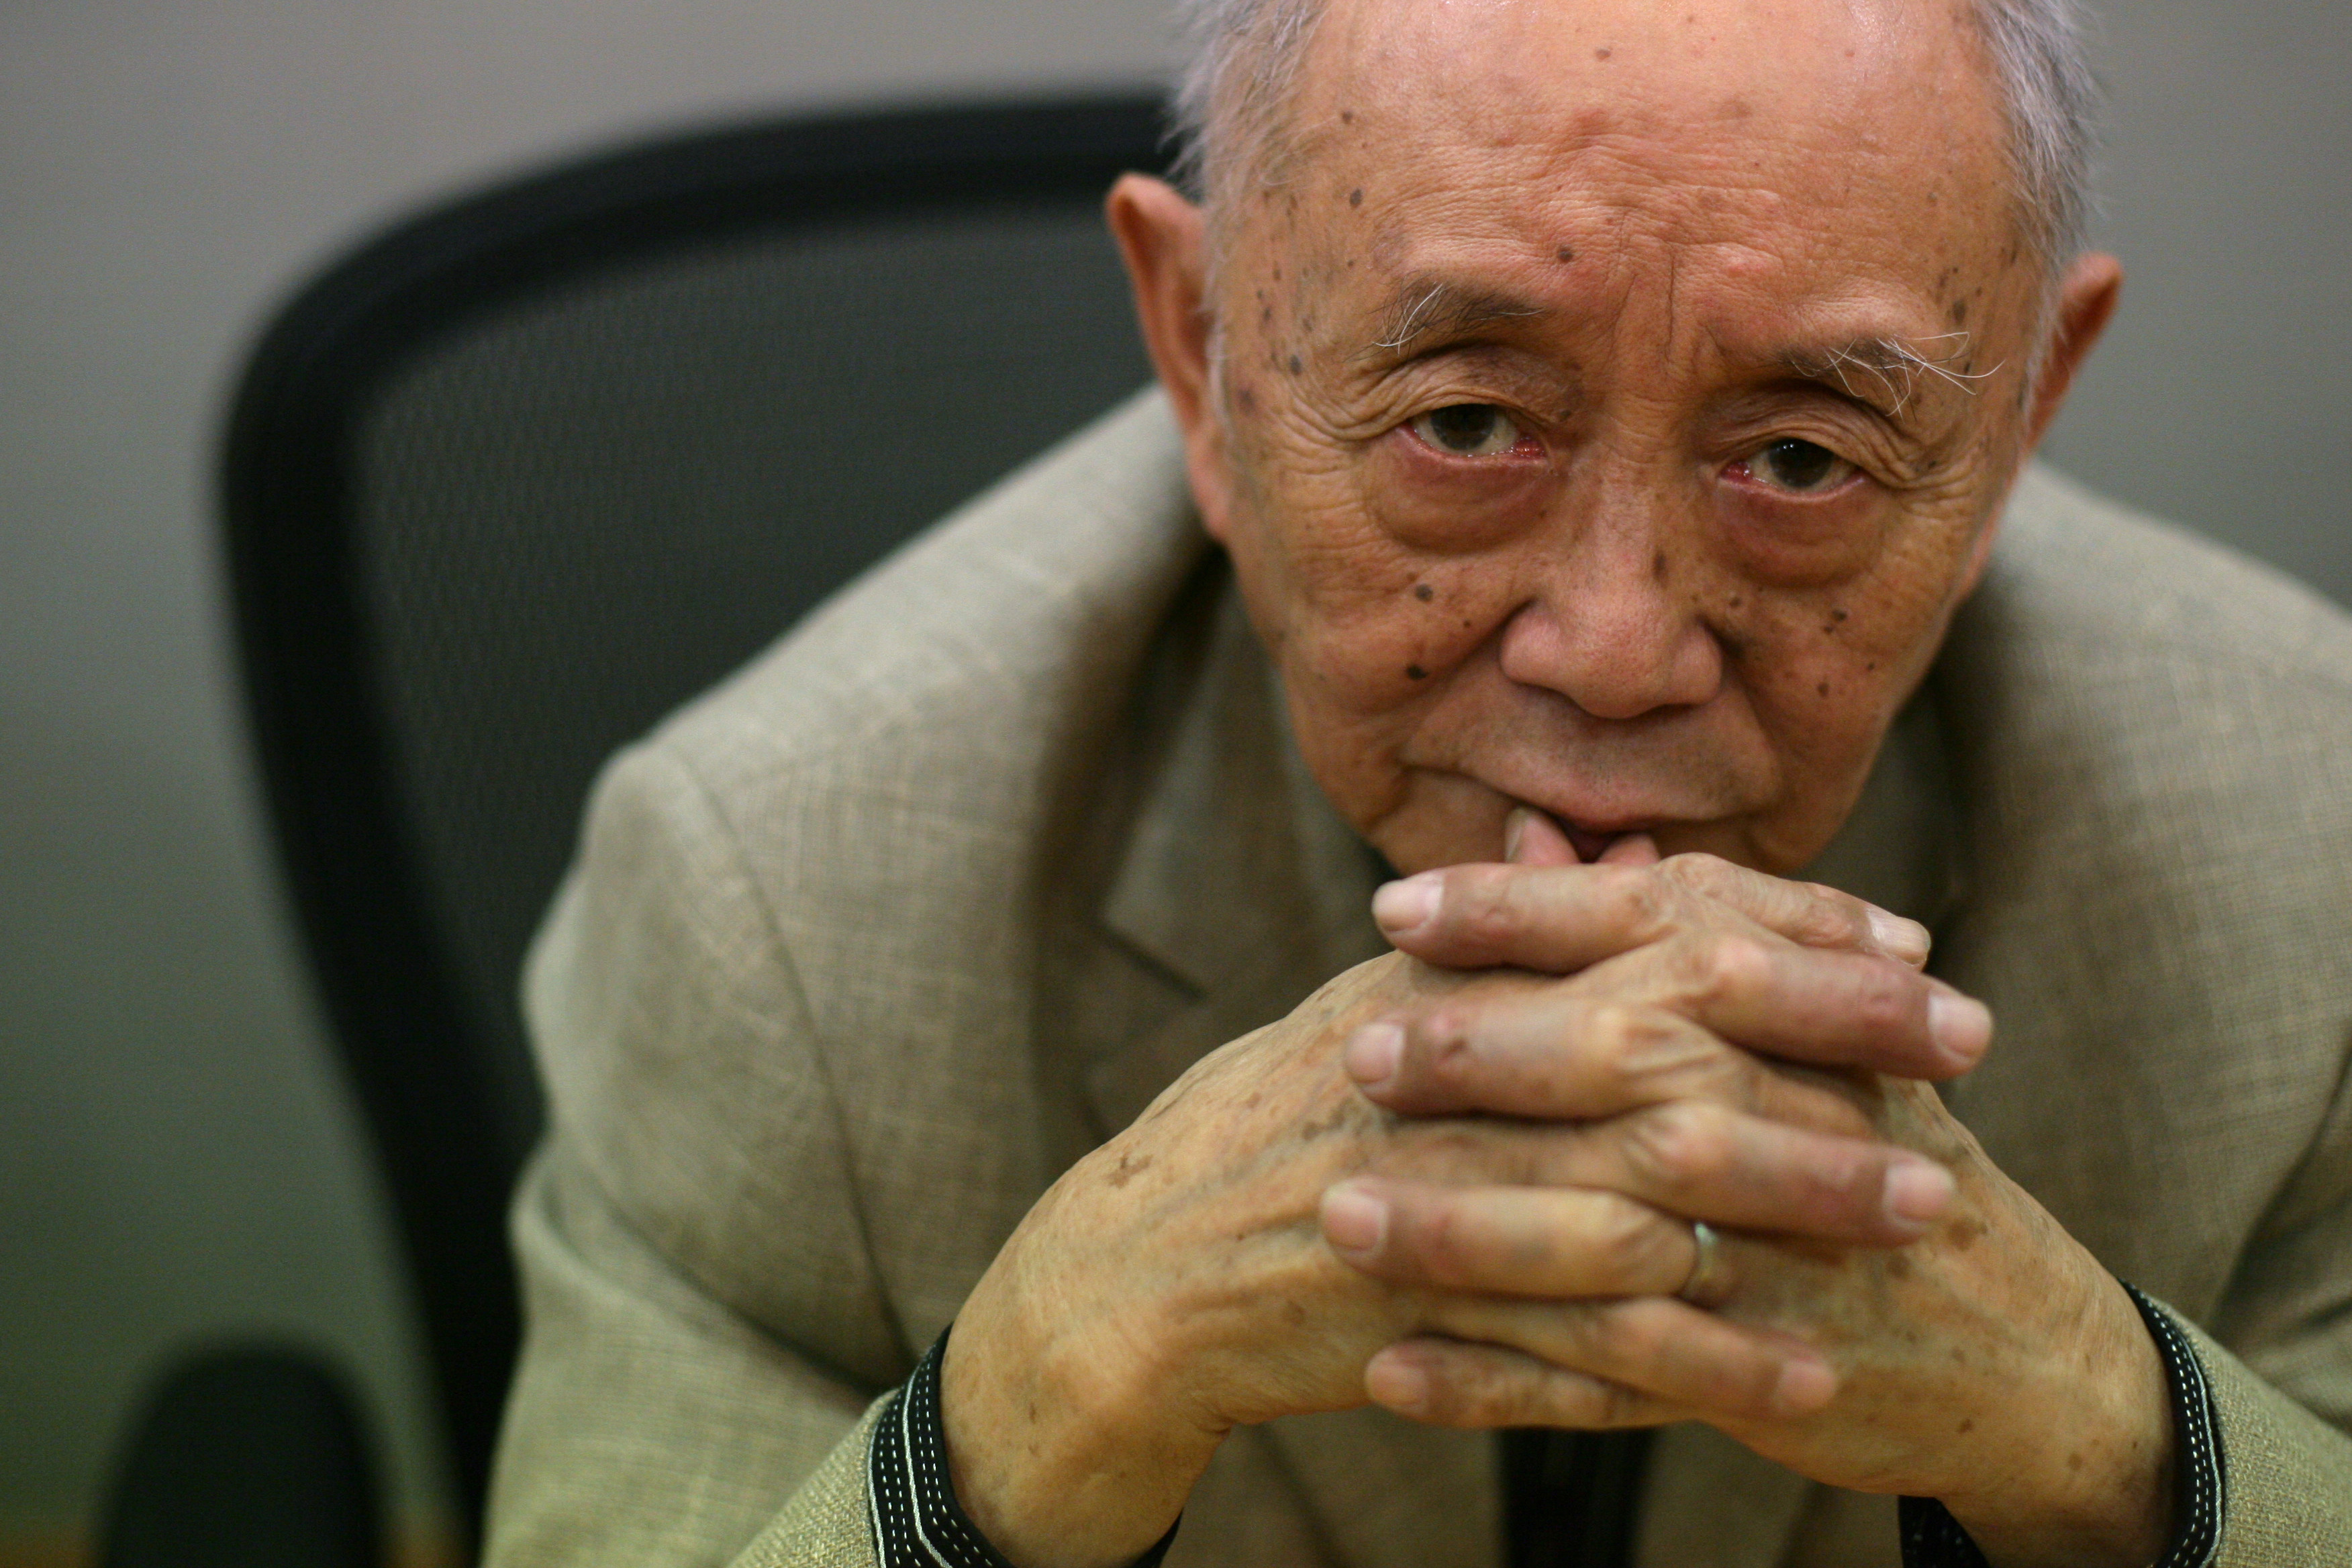 Chinese master painter, stamp maker and print artist Huang Yongyu has died aged 98. Photo: Ricky Chung